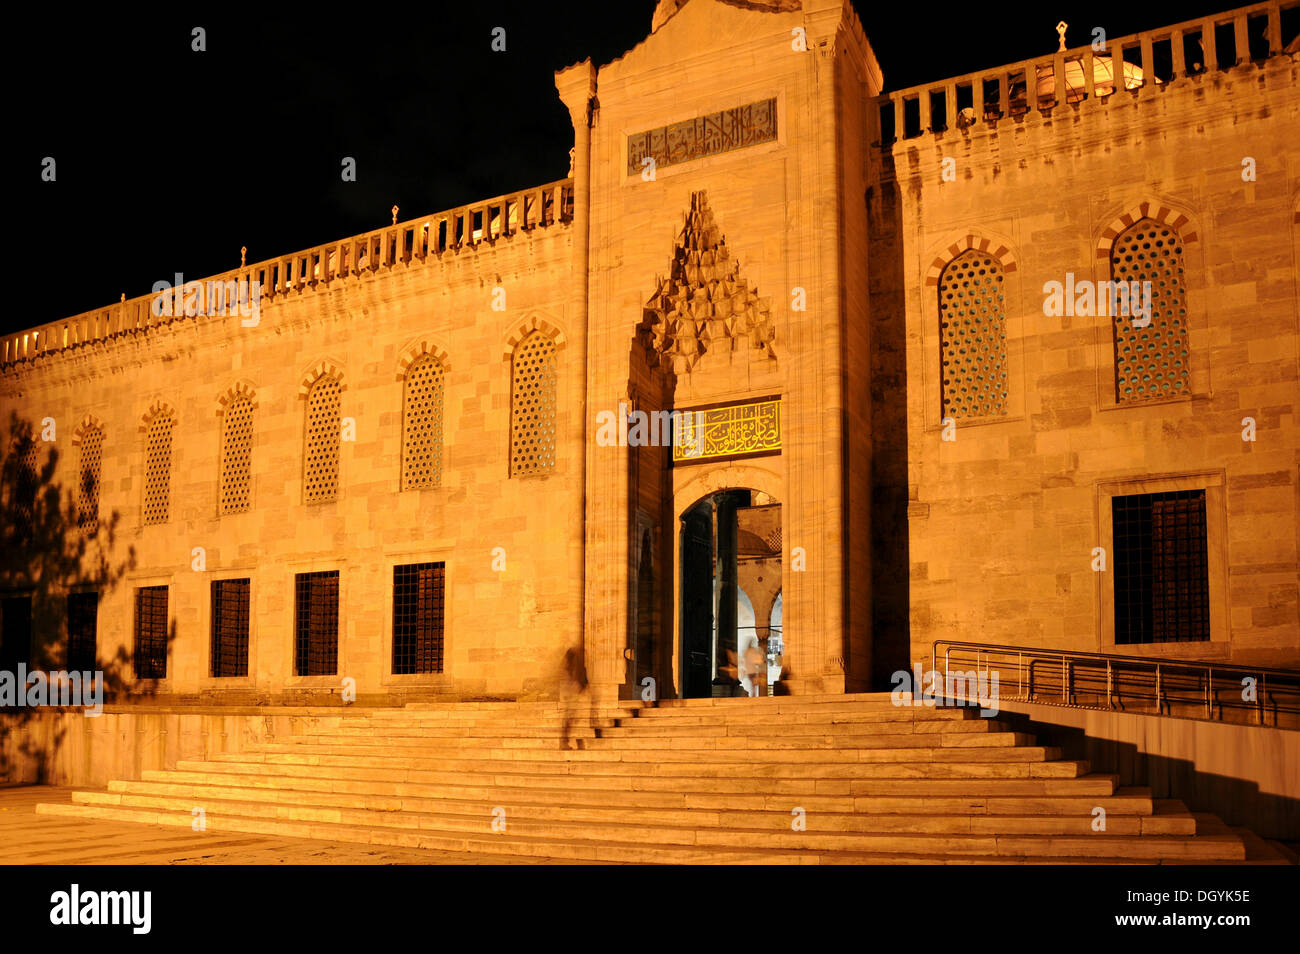 Night shot, entrance, Sultan Ahmed Mosque or Blue Mosque, old town, Istanbul, Europe Stock Photo